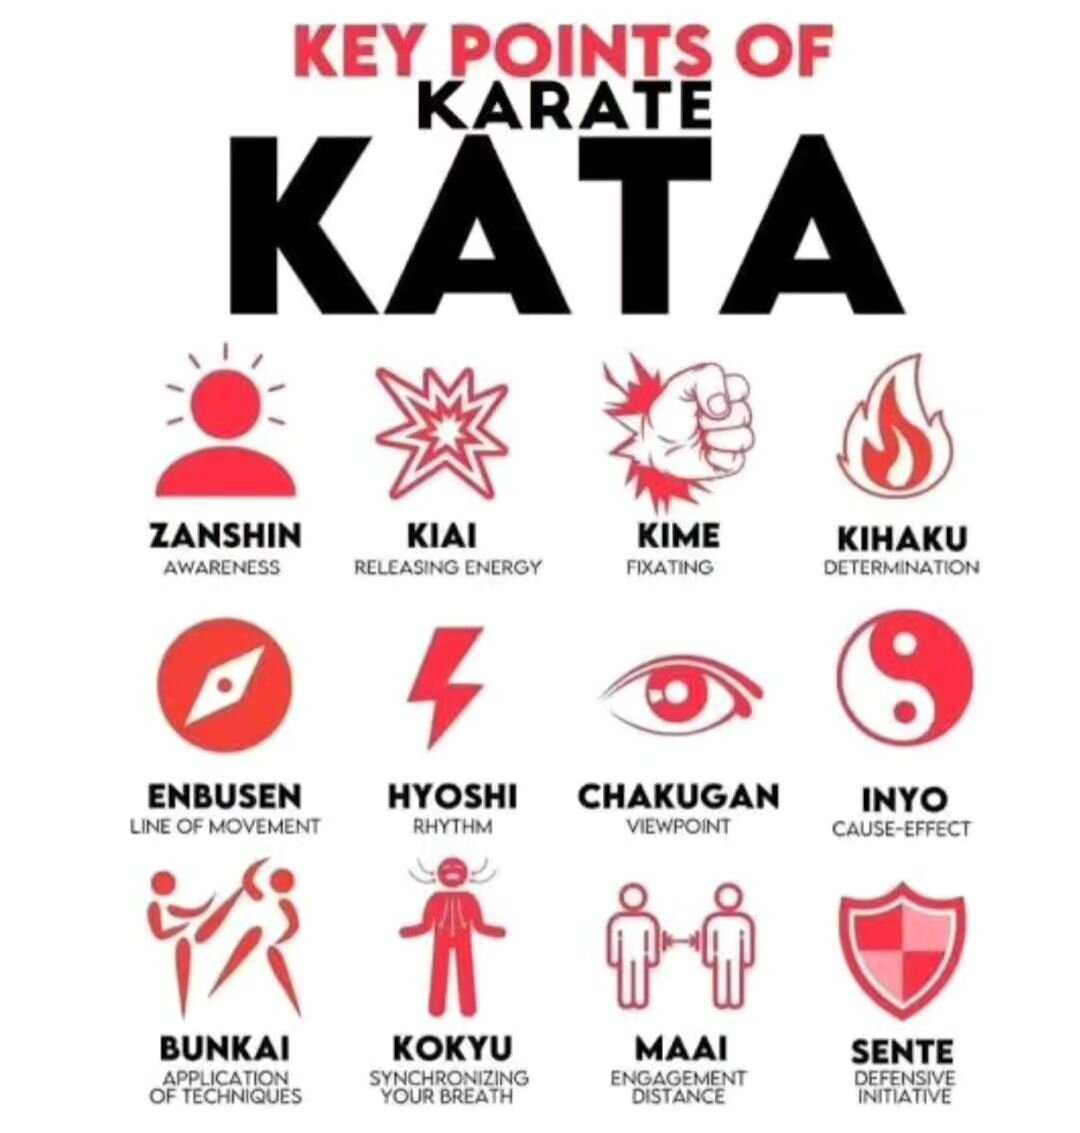 The concepts and principles in Kata apply in all combat training. Make your ten thousand reps in practice intentful, covering all dimensions. Get good at this and you may get good at learning. 
I believe a good black belt is one who has developed the